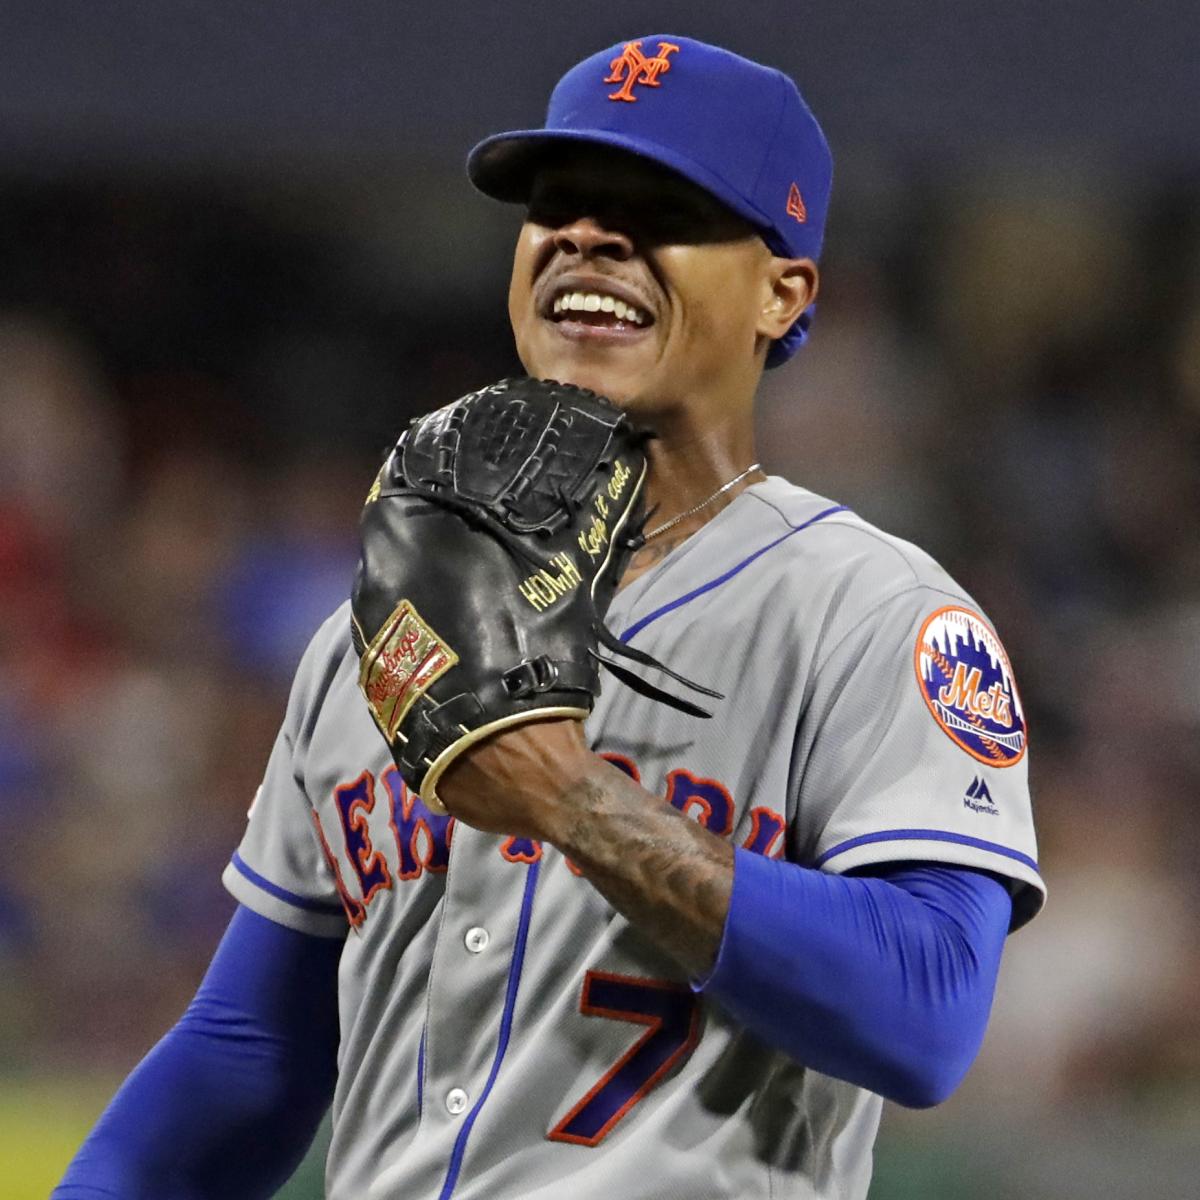 Marcus Stroman on X: Through it allI remain and I rise every